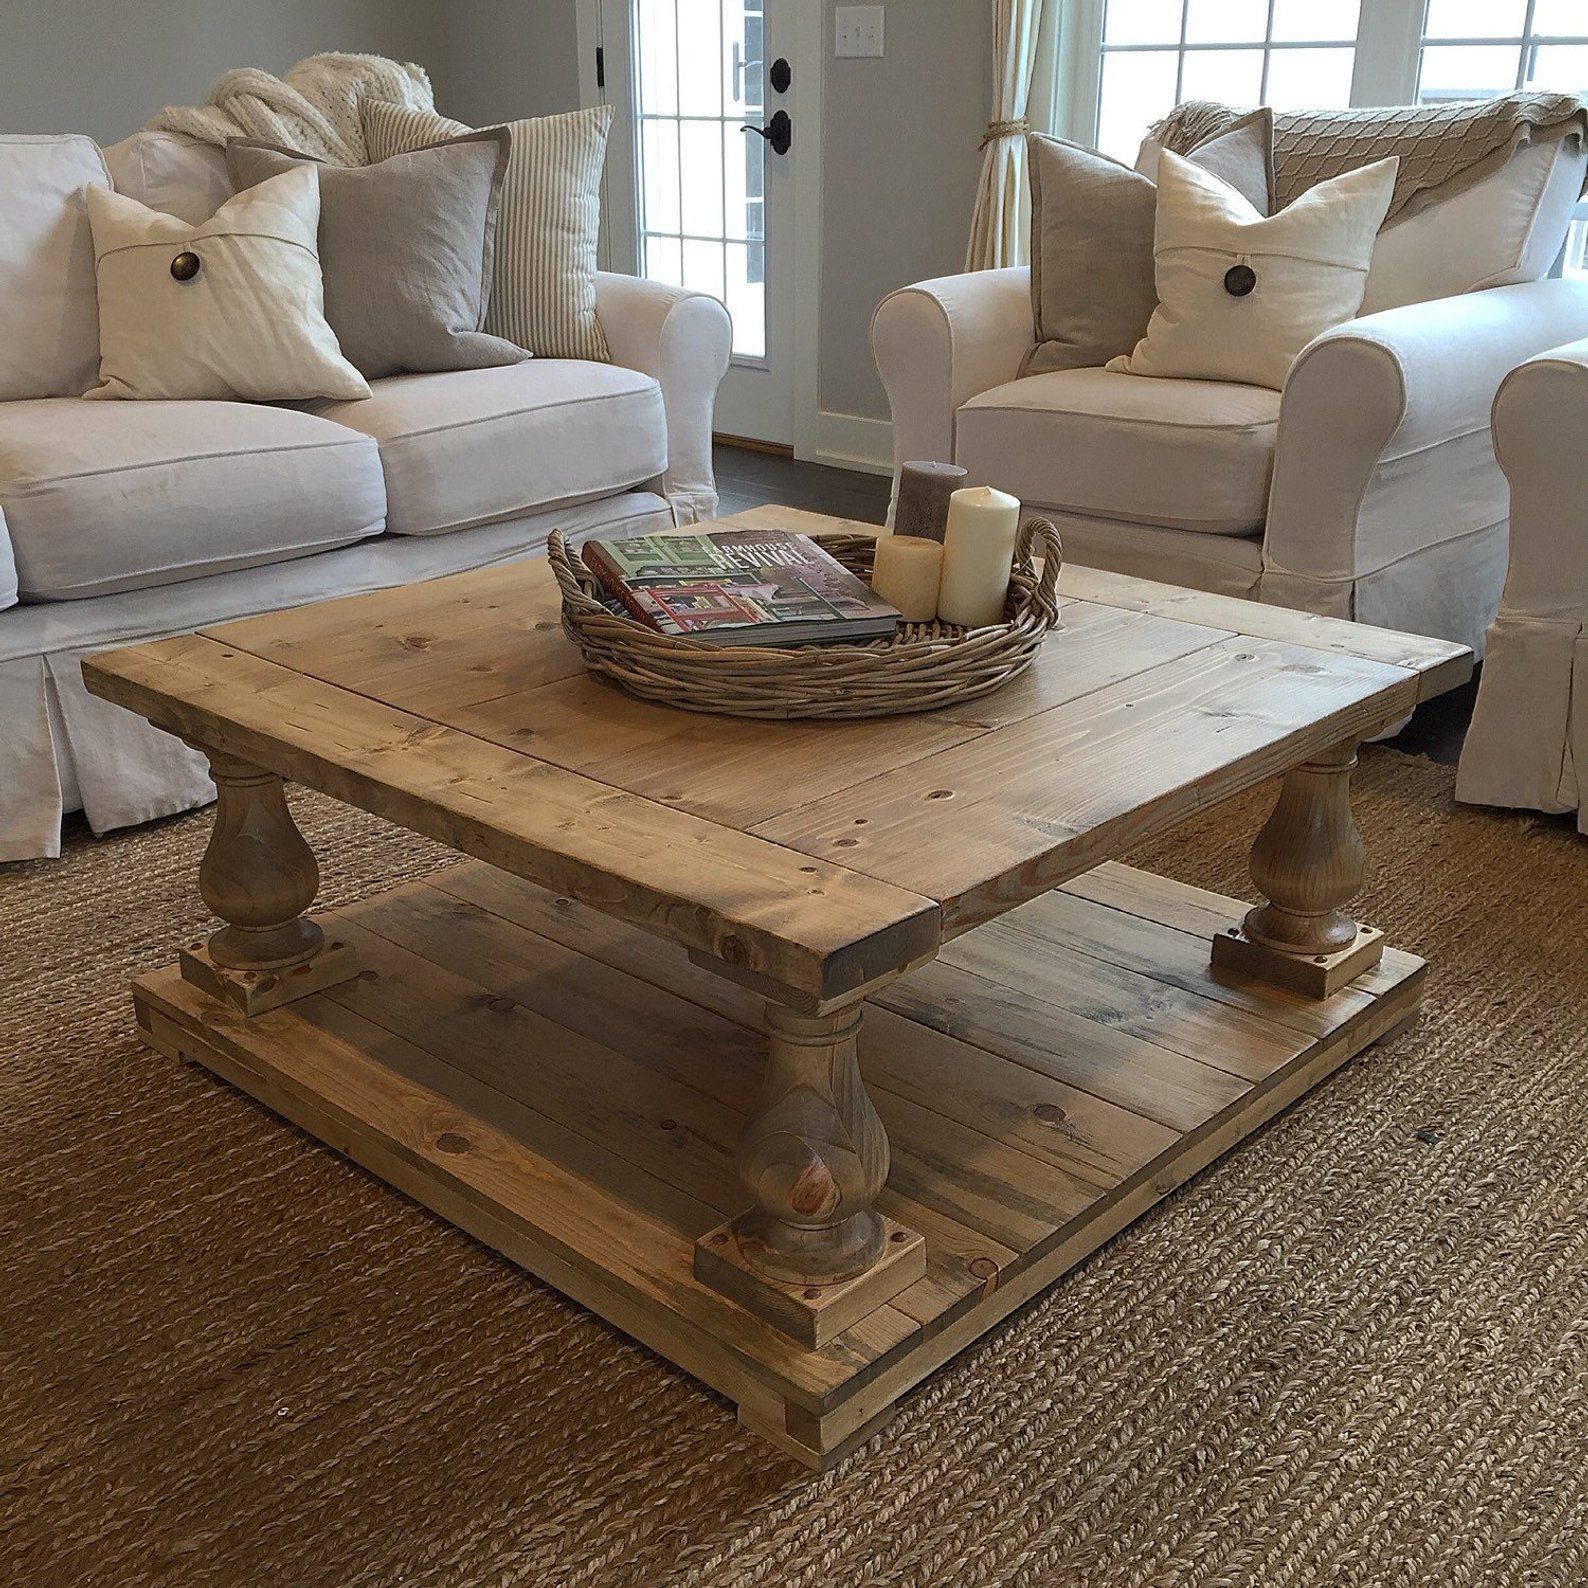 5 Reasons To Invest In A Rustic Farmhouse Coffee Table – Coffee Table Decor In Living Room Farmhouse Coffee Tables (Gallery 17 of 20)